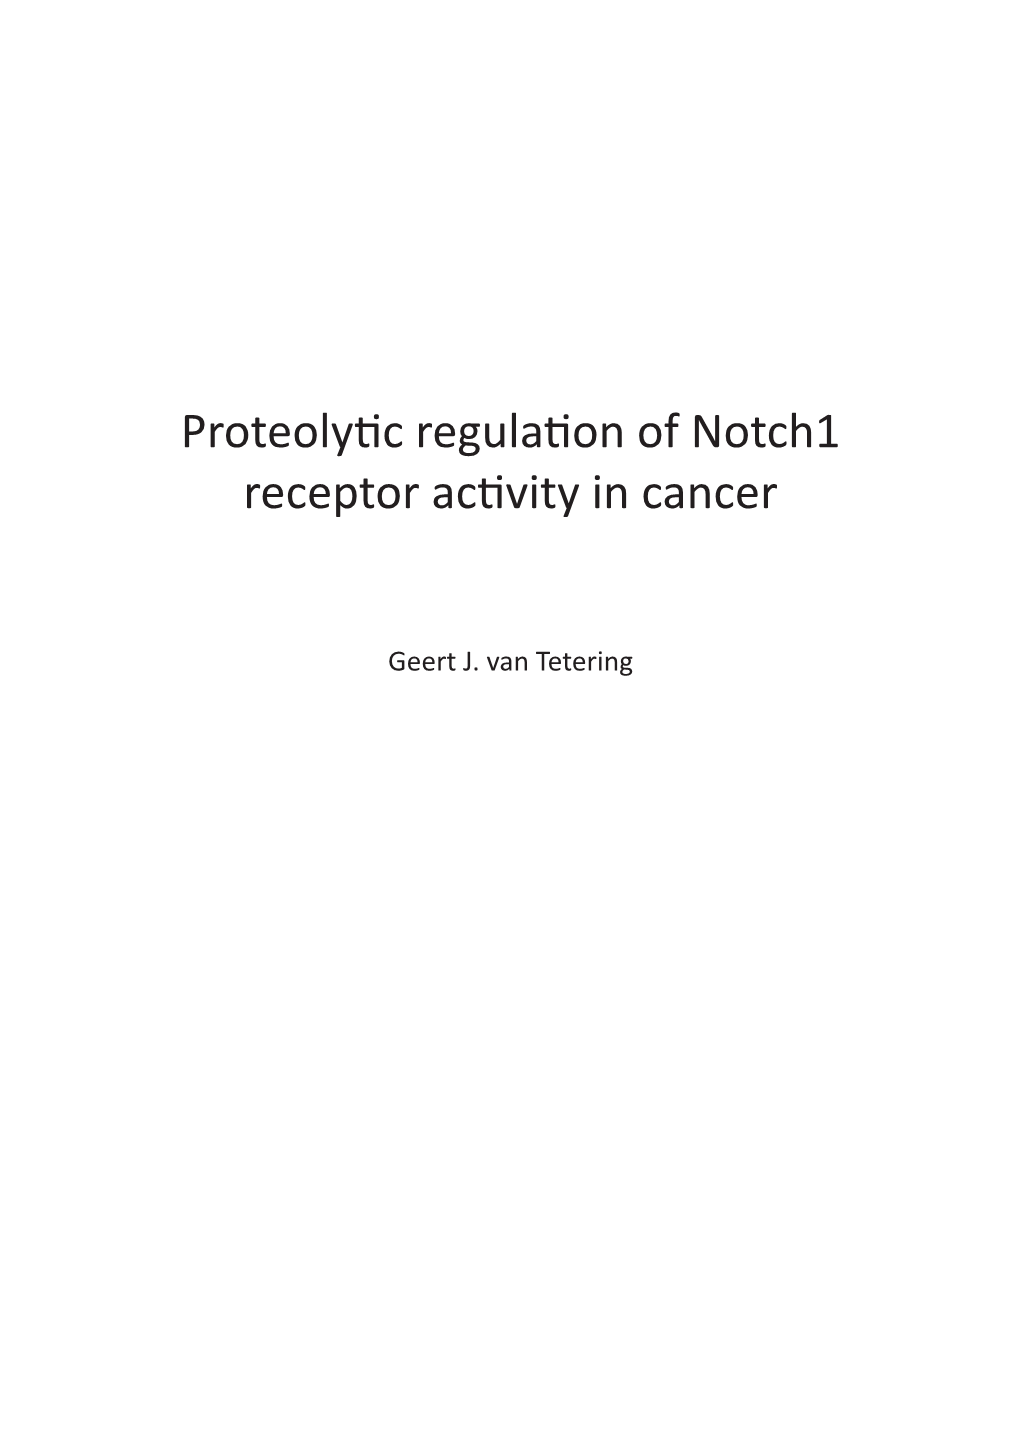 Proteolytic Regulation of Notch1 Receptor Activity in Cancer